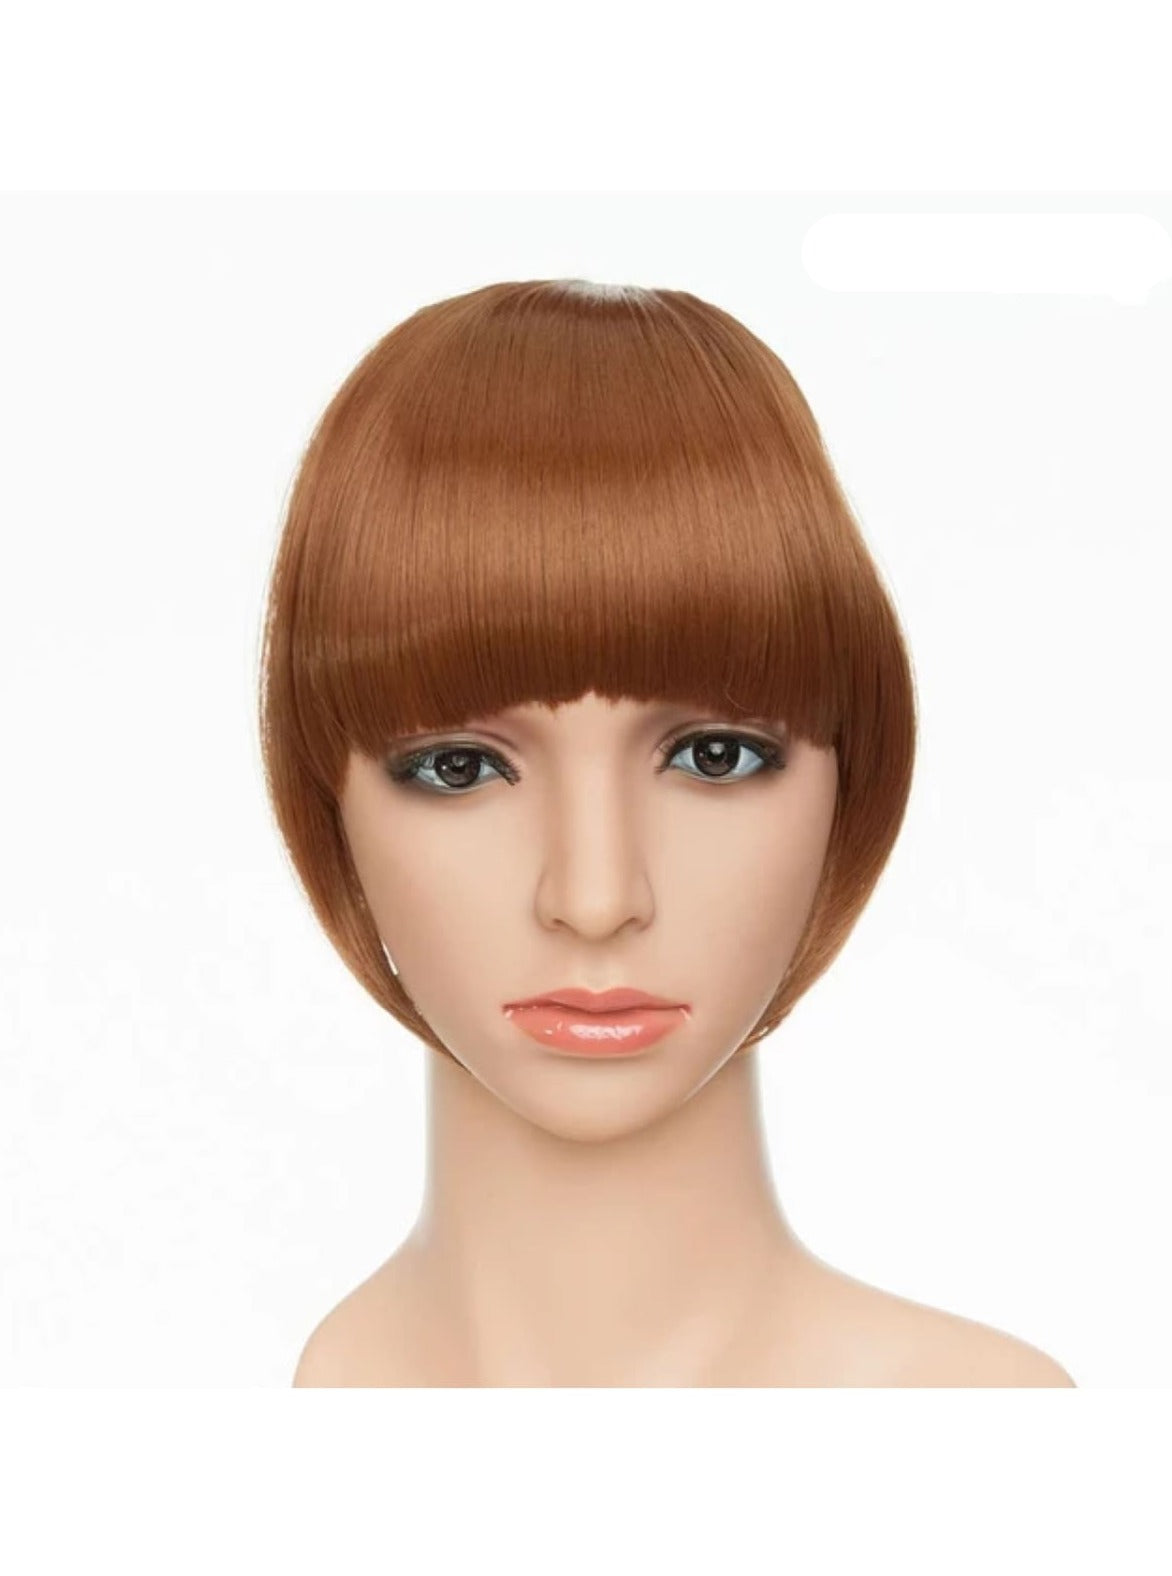 Girls Synthetic Removable Clip-On Bangs - Light Auburn / One Size - Girls Halloween Costume